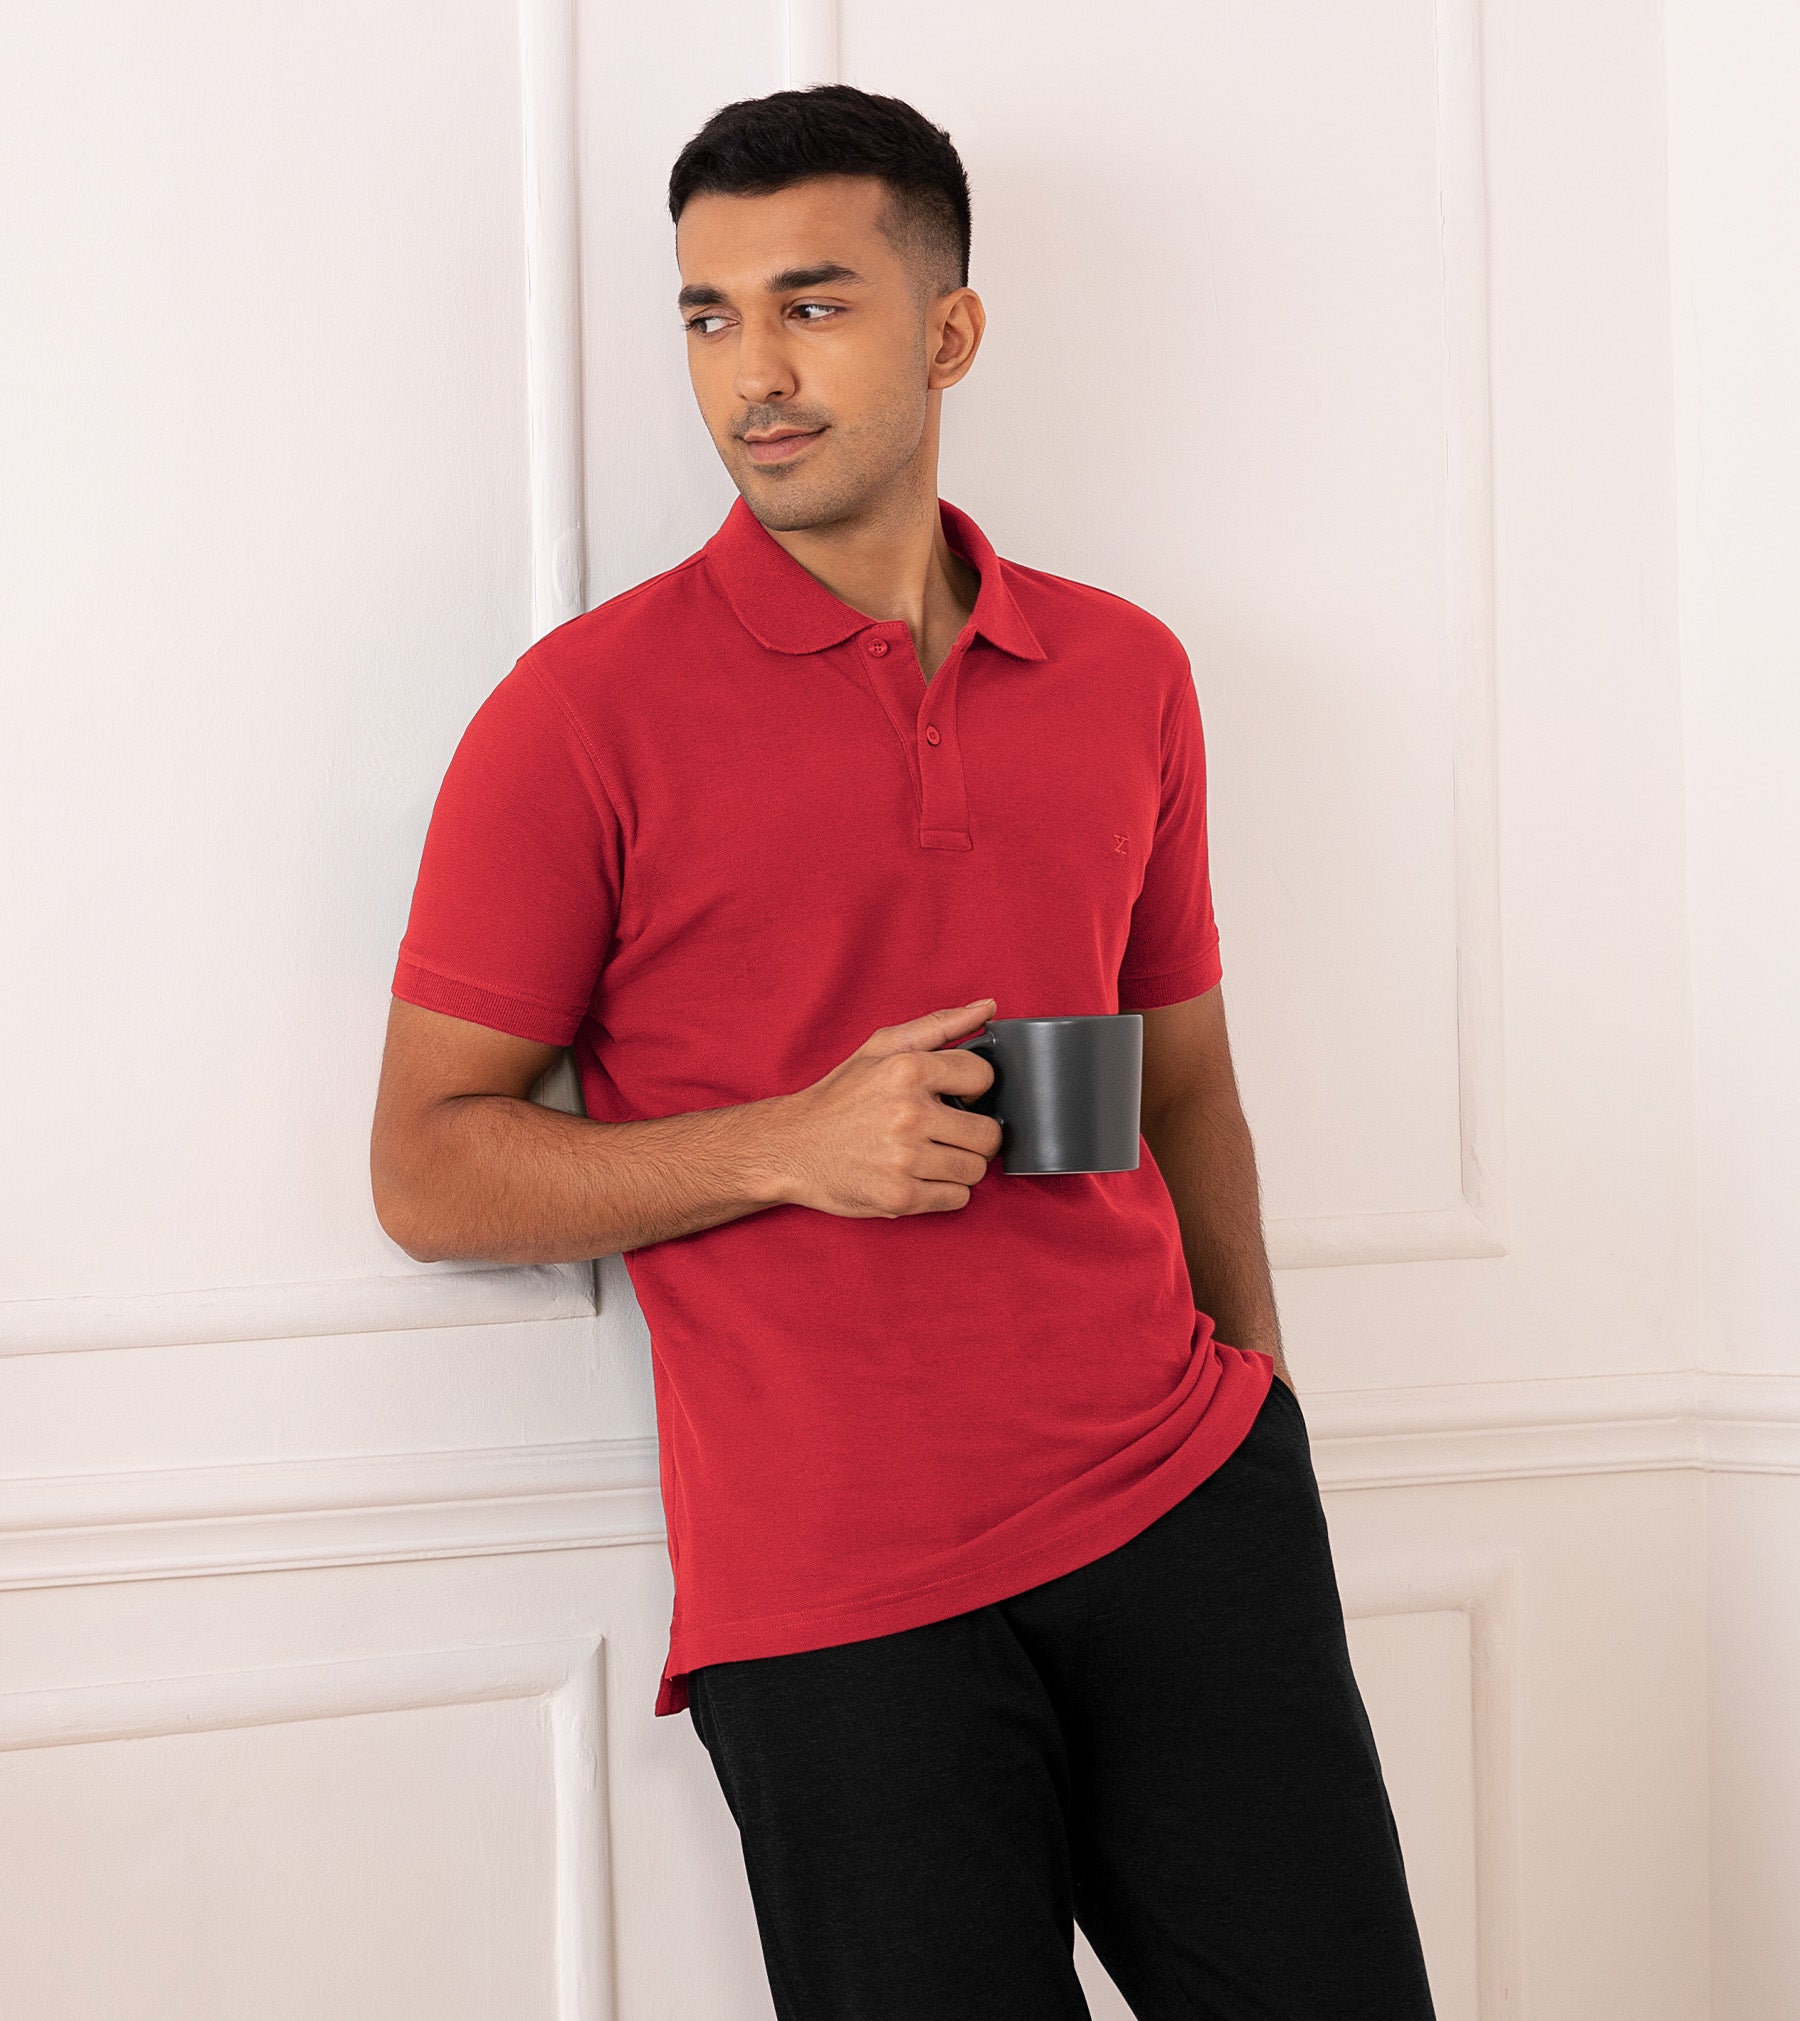 What Is The Combed Cotton Used In My Polo Shirt?